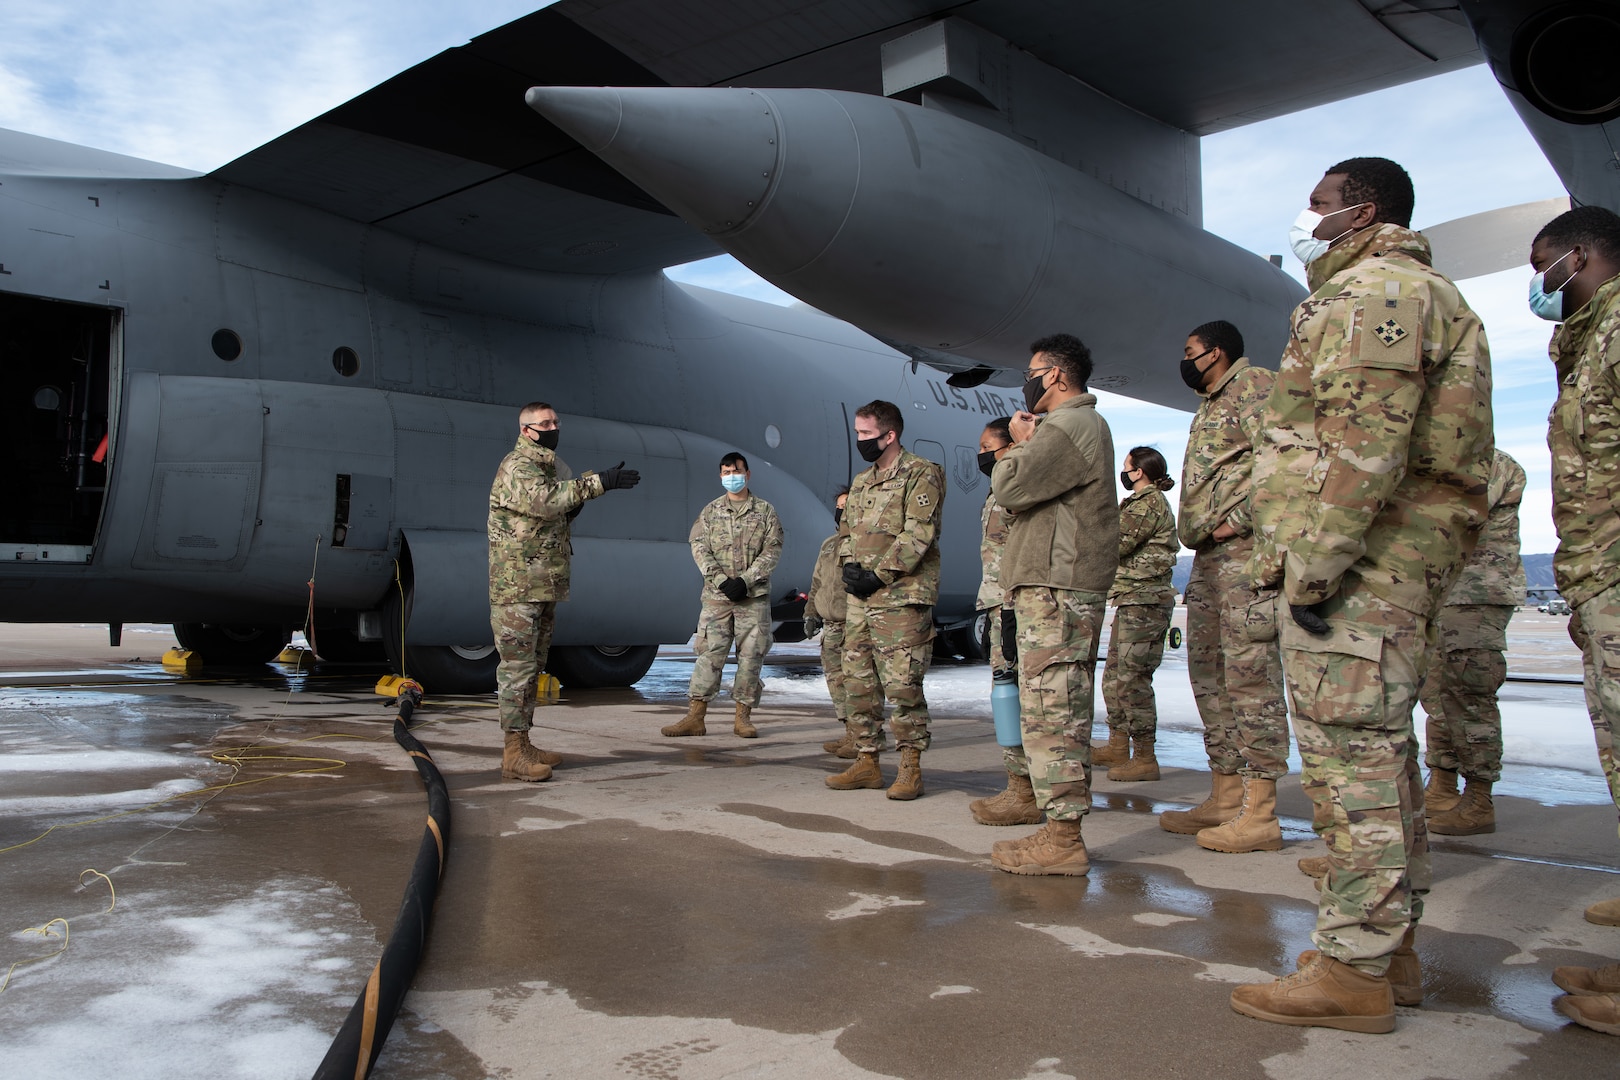 A man speaks to a small group of soldiers in front of a C-130 aircraft with a black fuel hose on the ground leading to the aircraft.